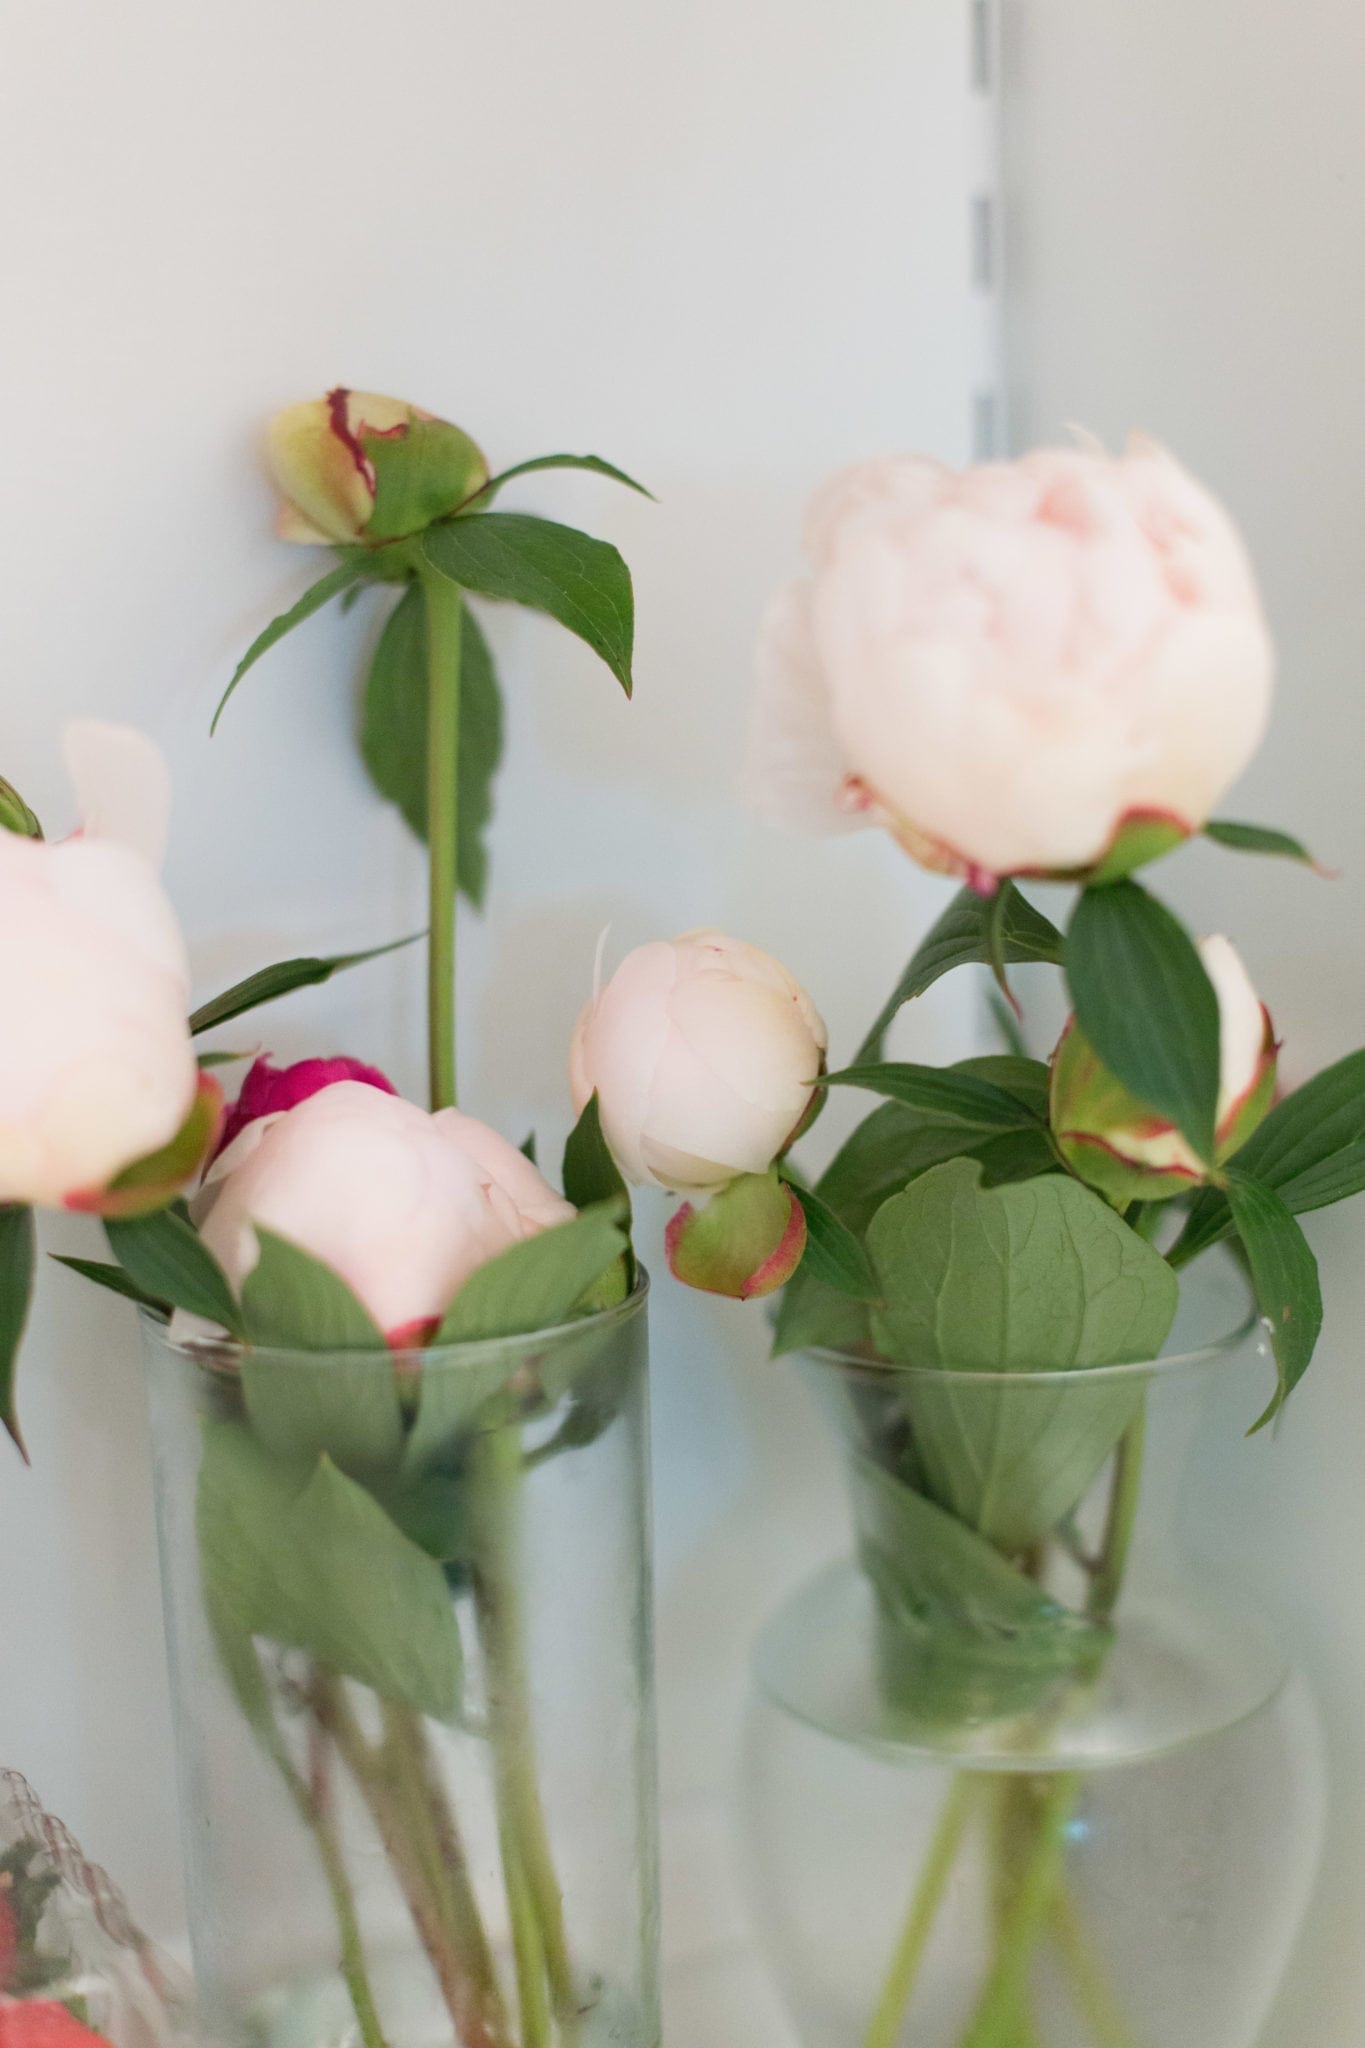 Storing peonies to bloom at a later date. Everything you need to know about how to keep peonies for months in your refrigerator.